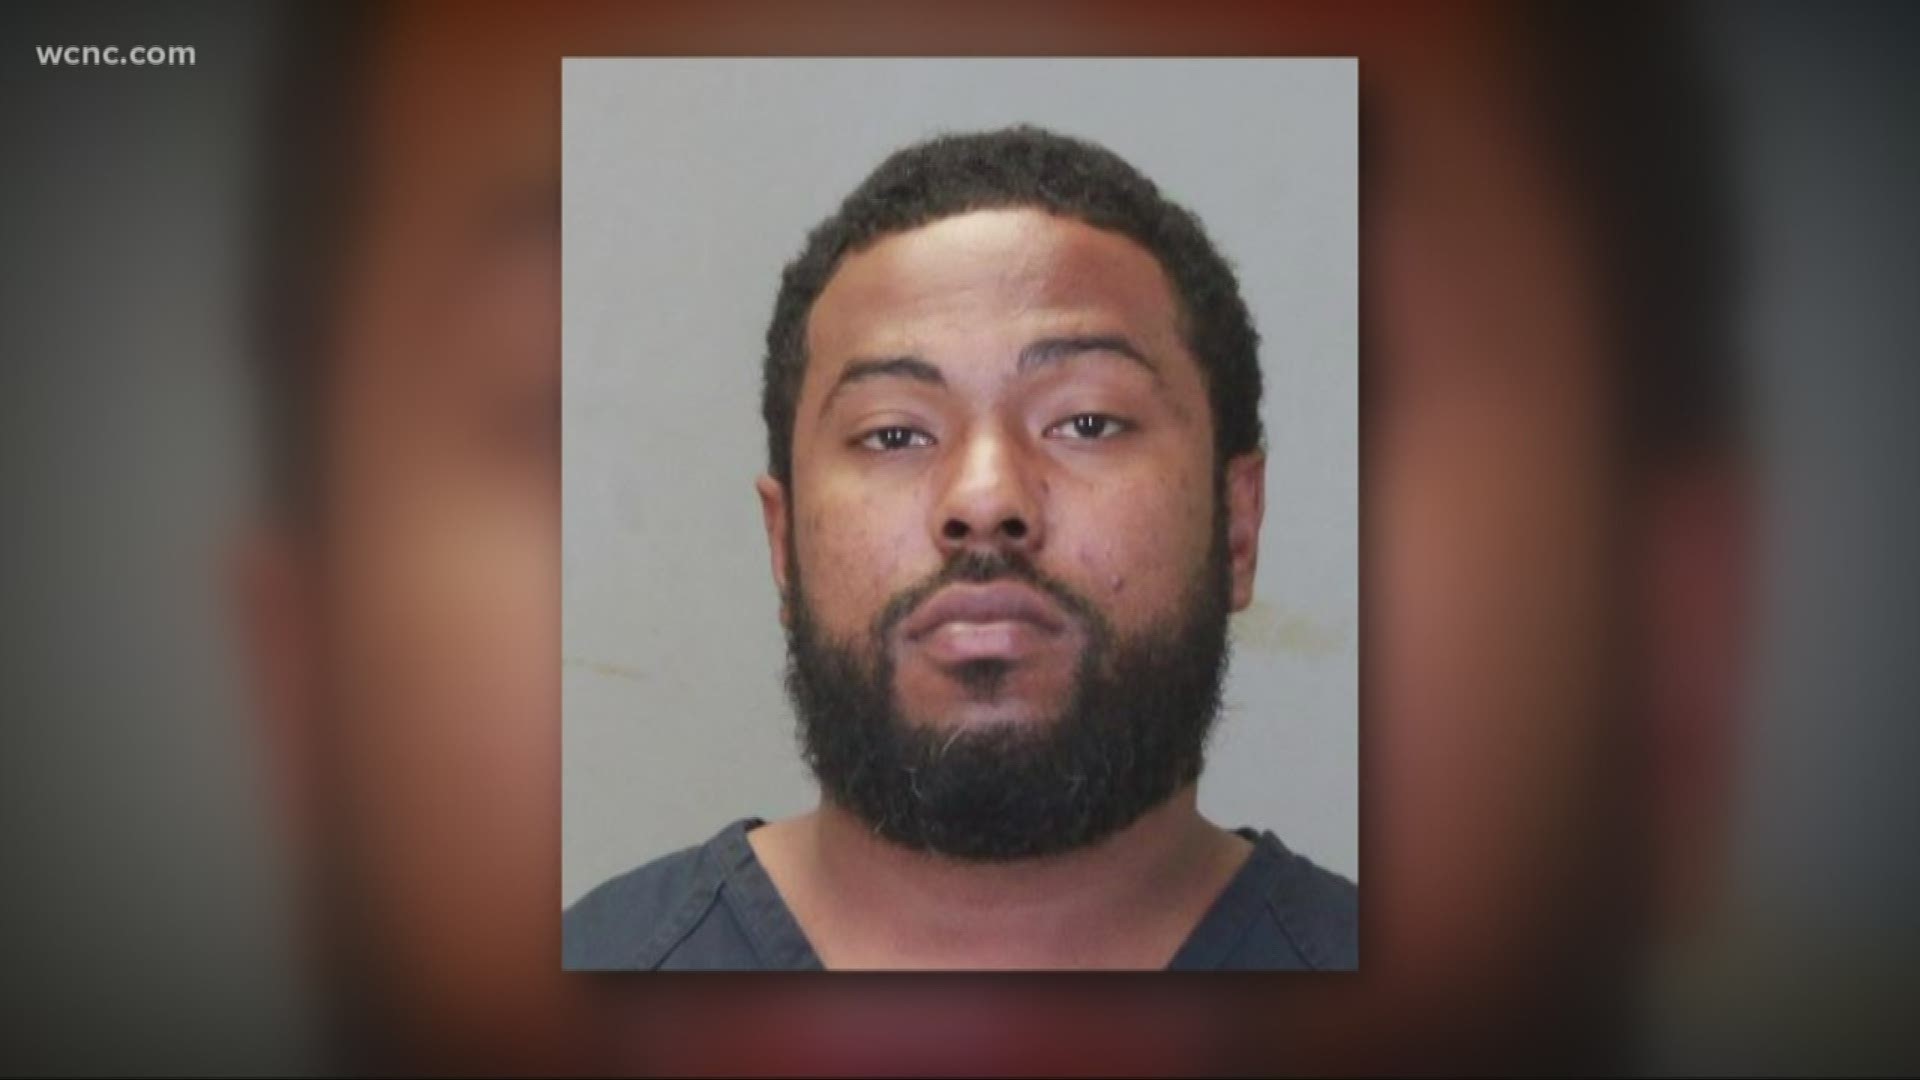 He was arrested in Georgia months after the first case he is believed to be connected to. He's facing multiple charges.